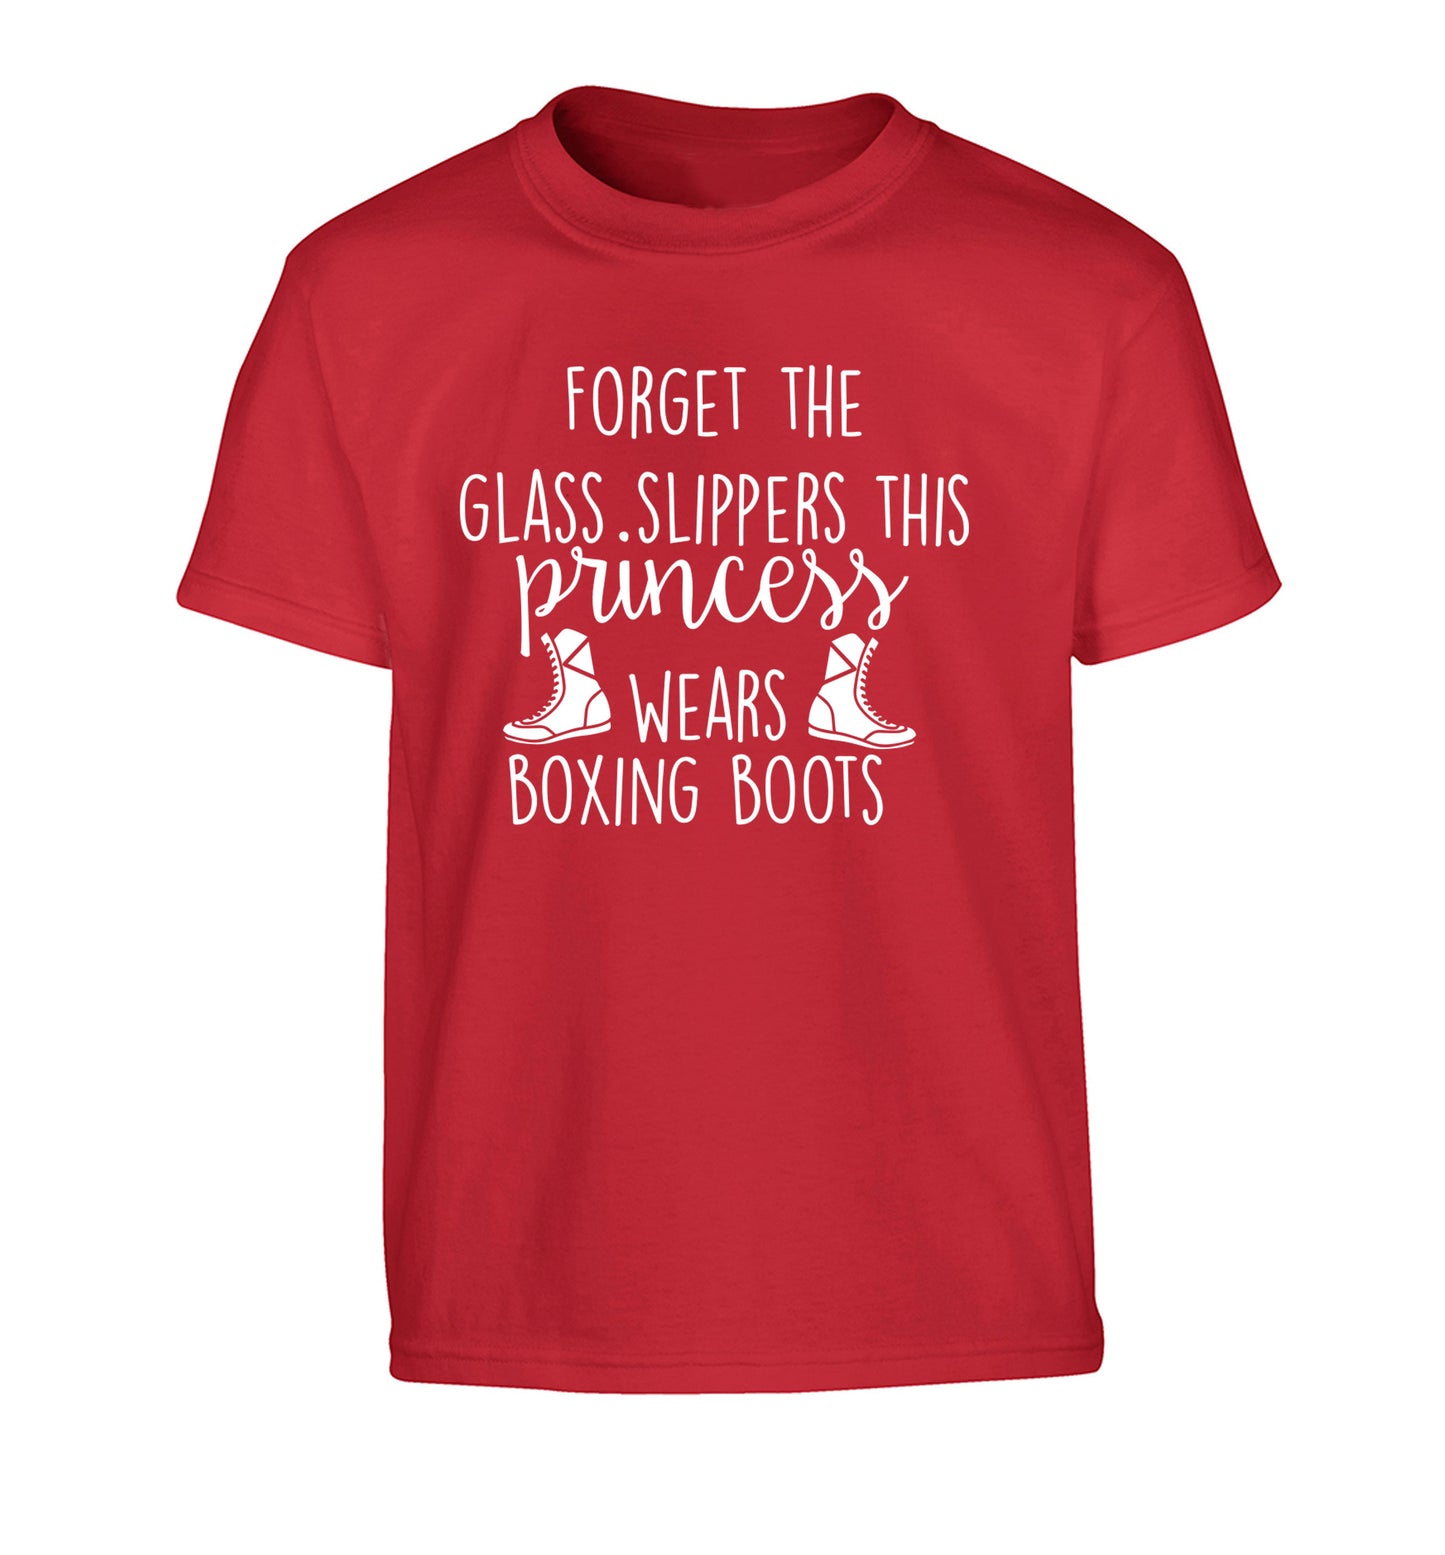 Forget the glass slippers this princess wears boxing boots Children's red Tshirt 12-14 Years